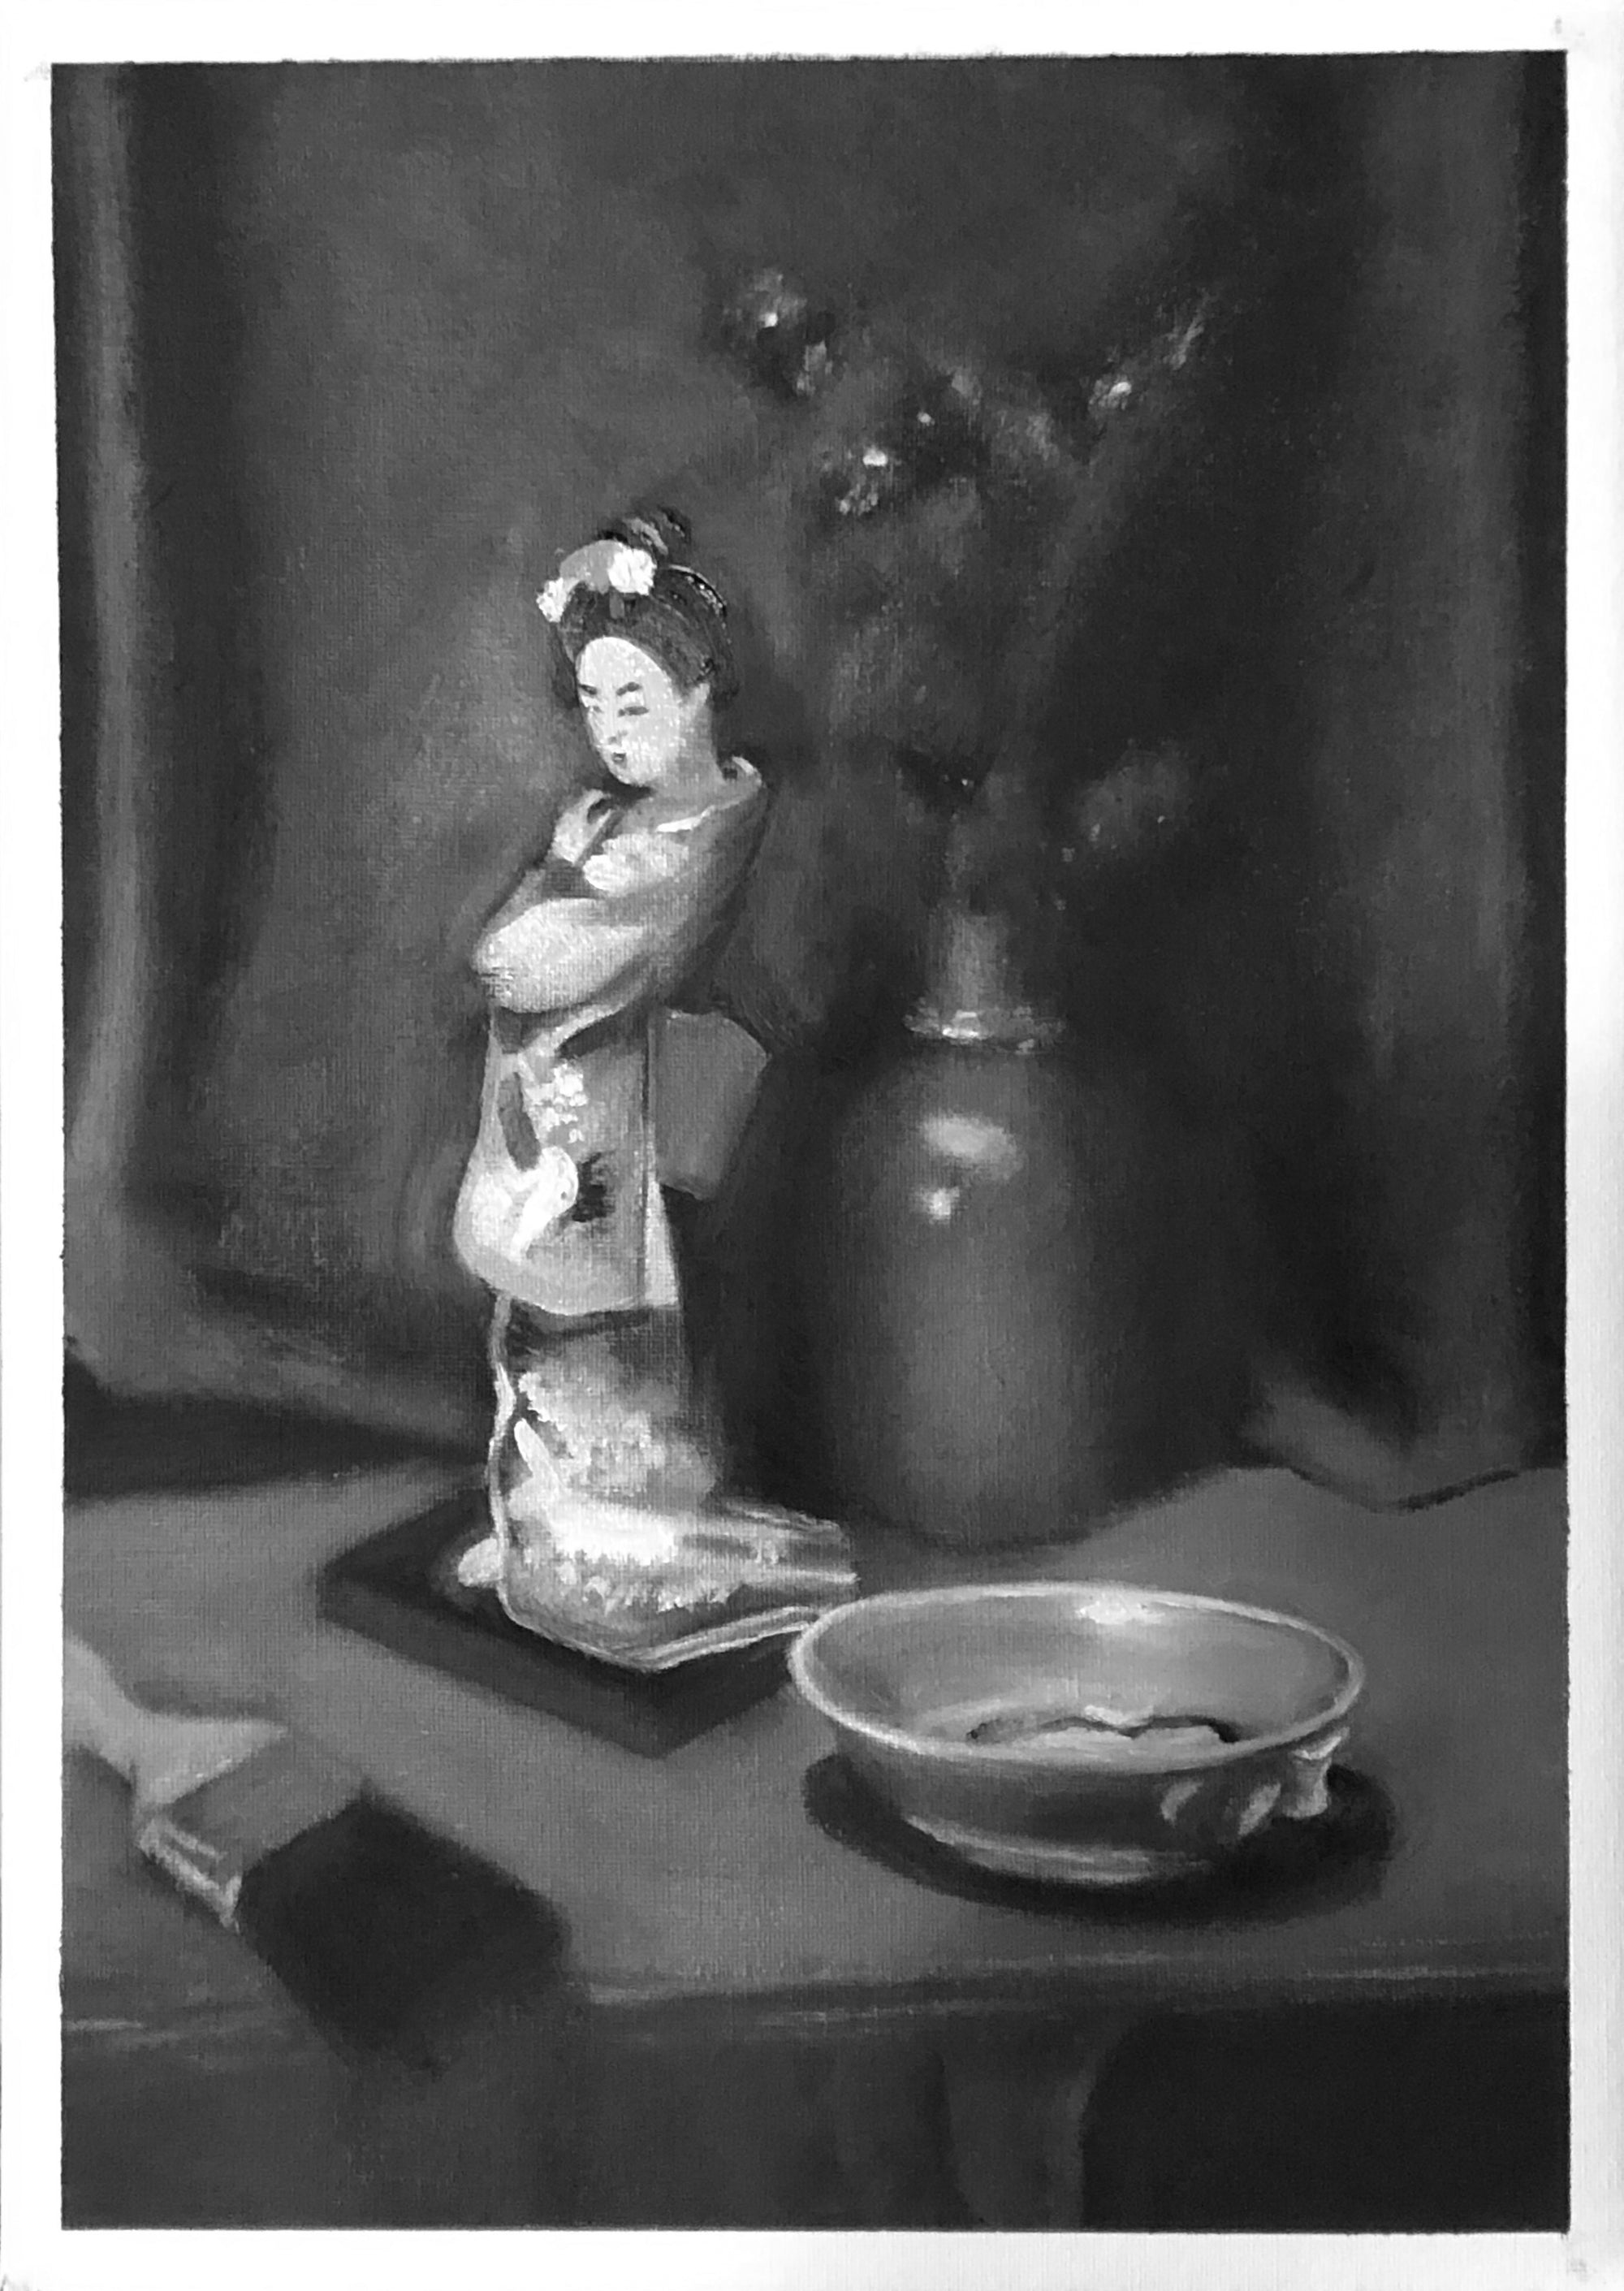 Momento IV Still Life with Figurine - Oil on Canvas  - 260 x 380 mm